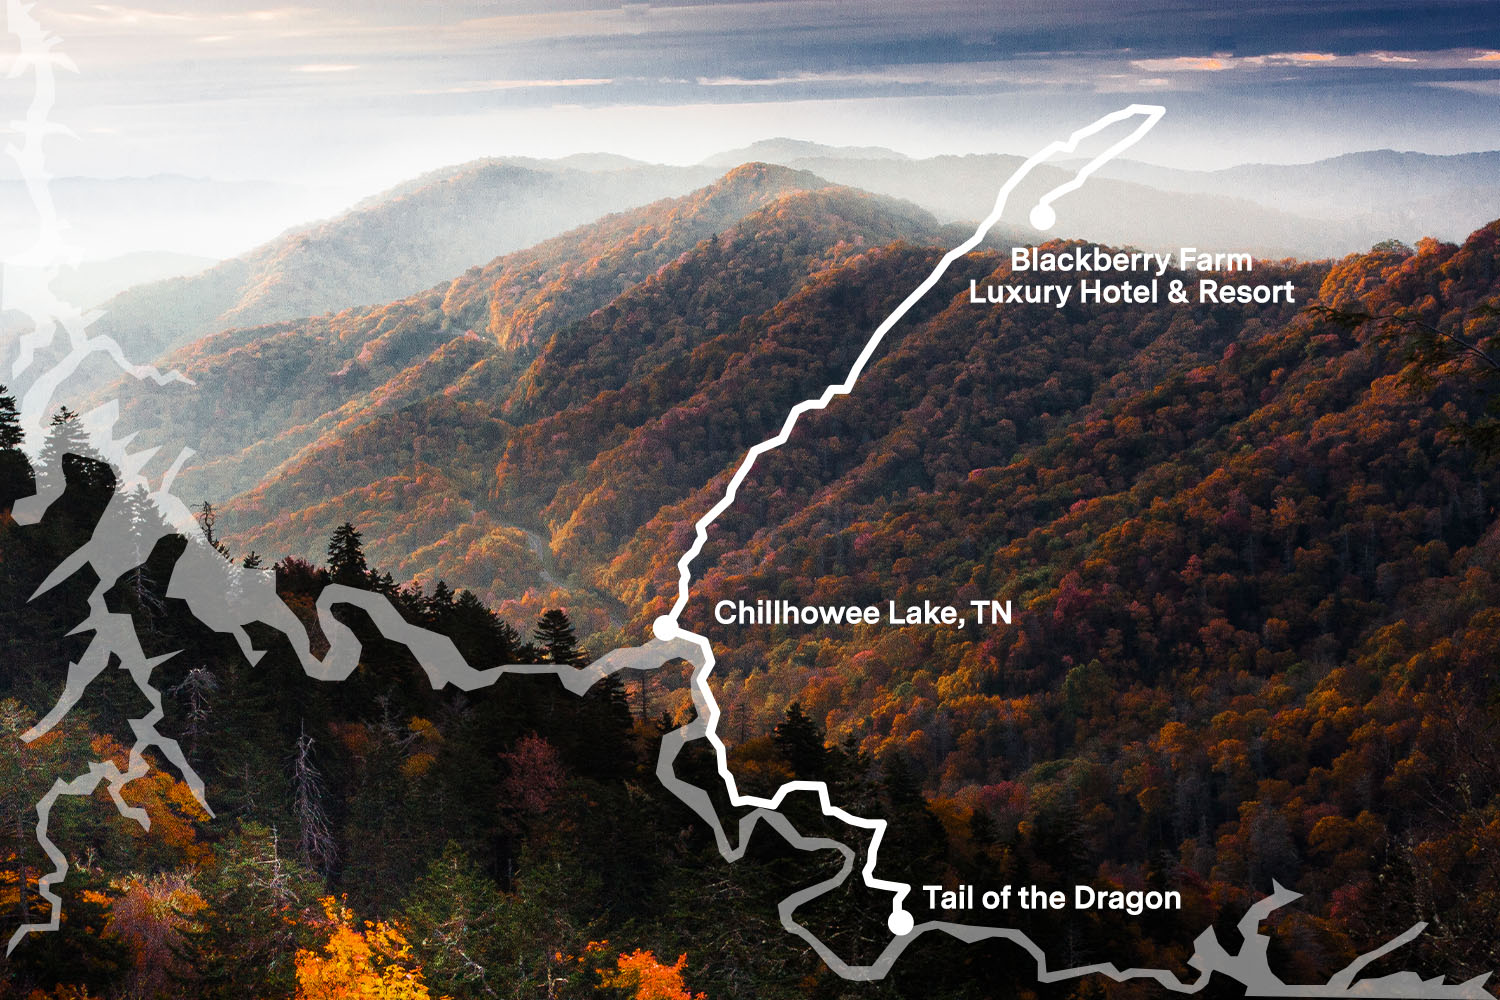 The Best Scenic Drive in Appalachia, US 129 in NC and TN, or The Tail of the Dragon, runs through Great Smoky Mountains National Park